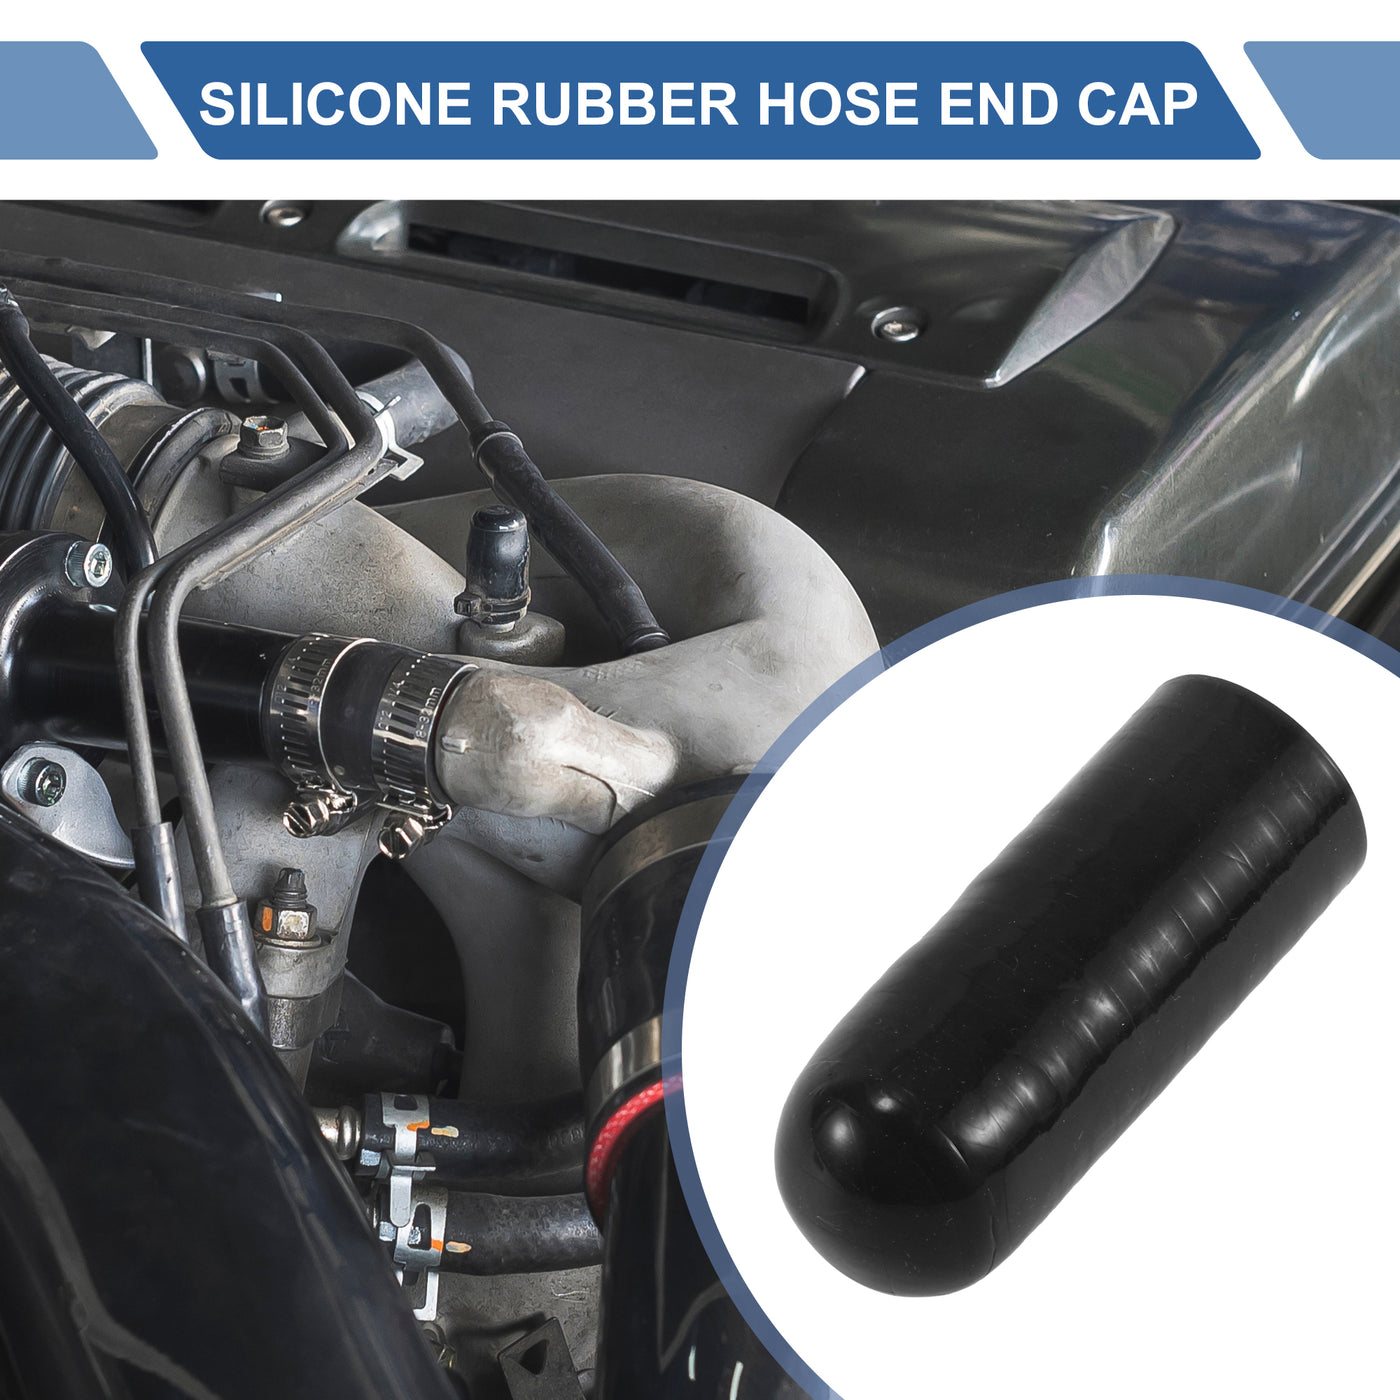 X AUTOHAUX 1 Pcs 60mm Length 22mm/0.87" ID Black Car Silicone Rubber Hose End Cap with Clamp Silicone Reinforced Blanking Cap for Bypass Tube Universal